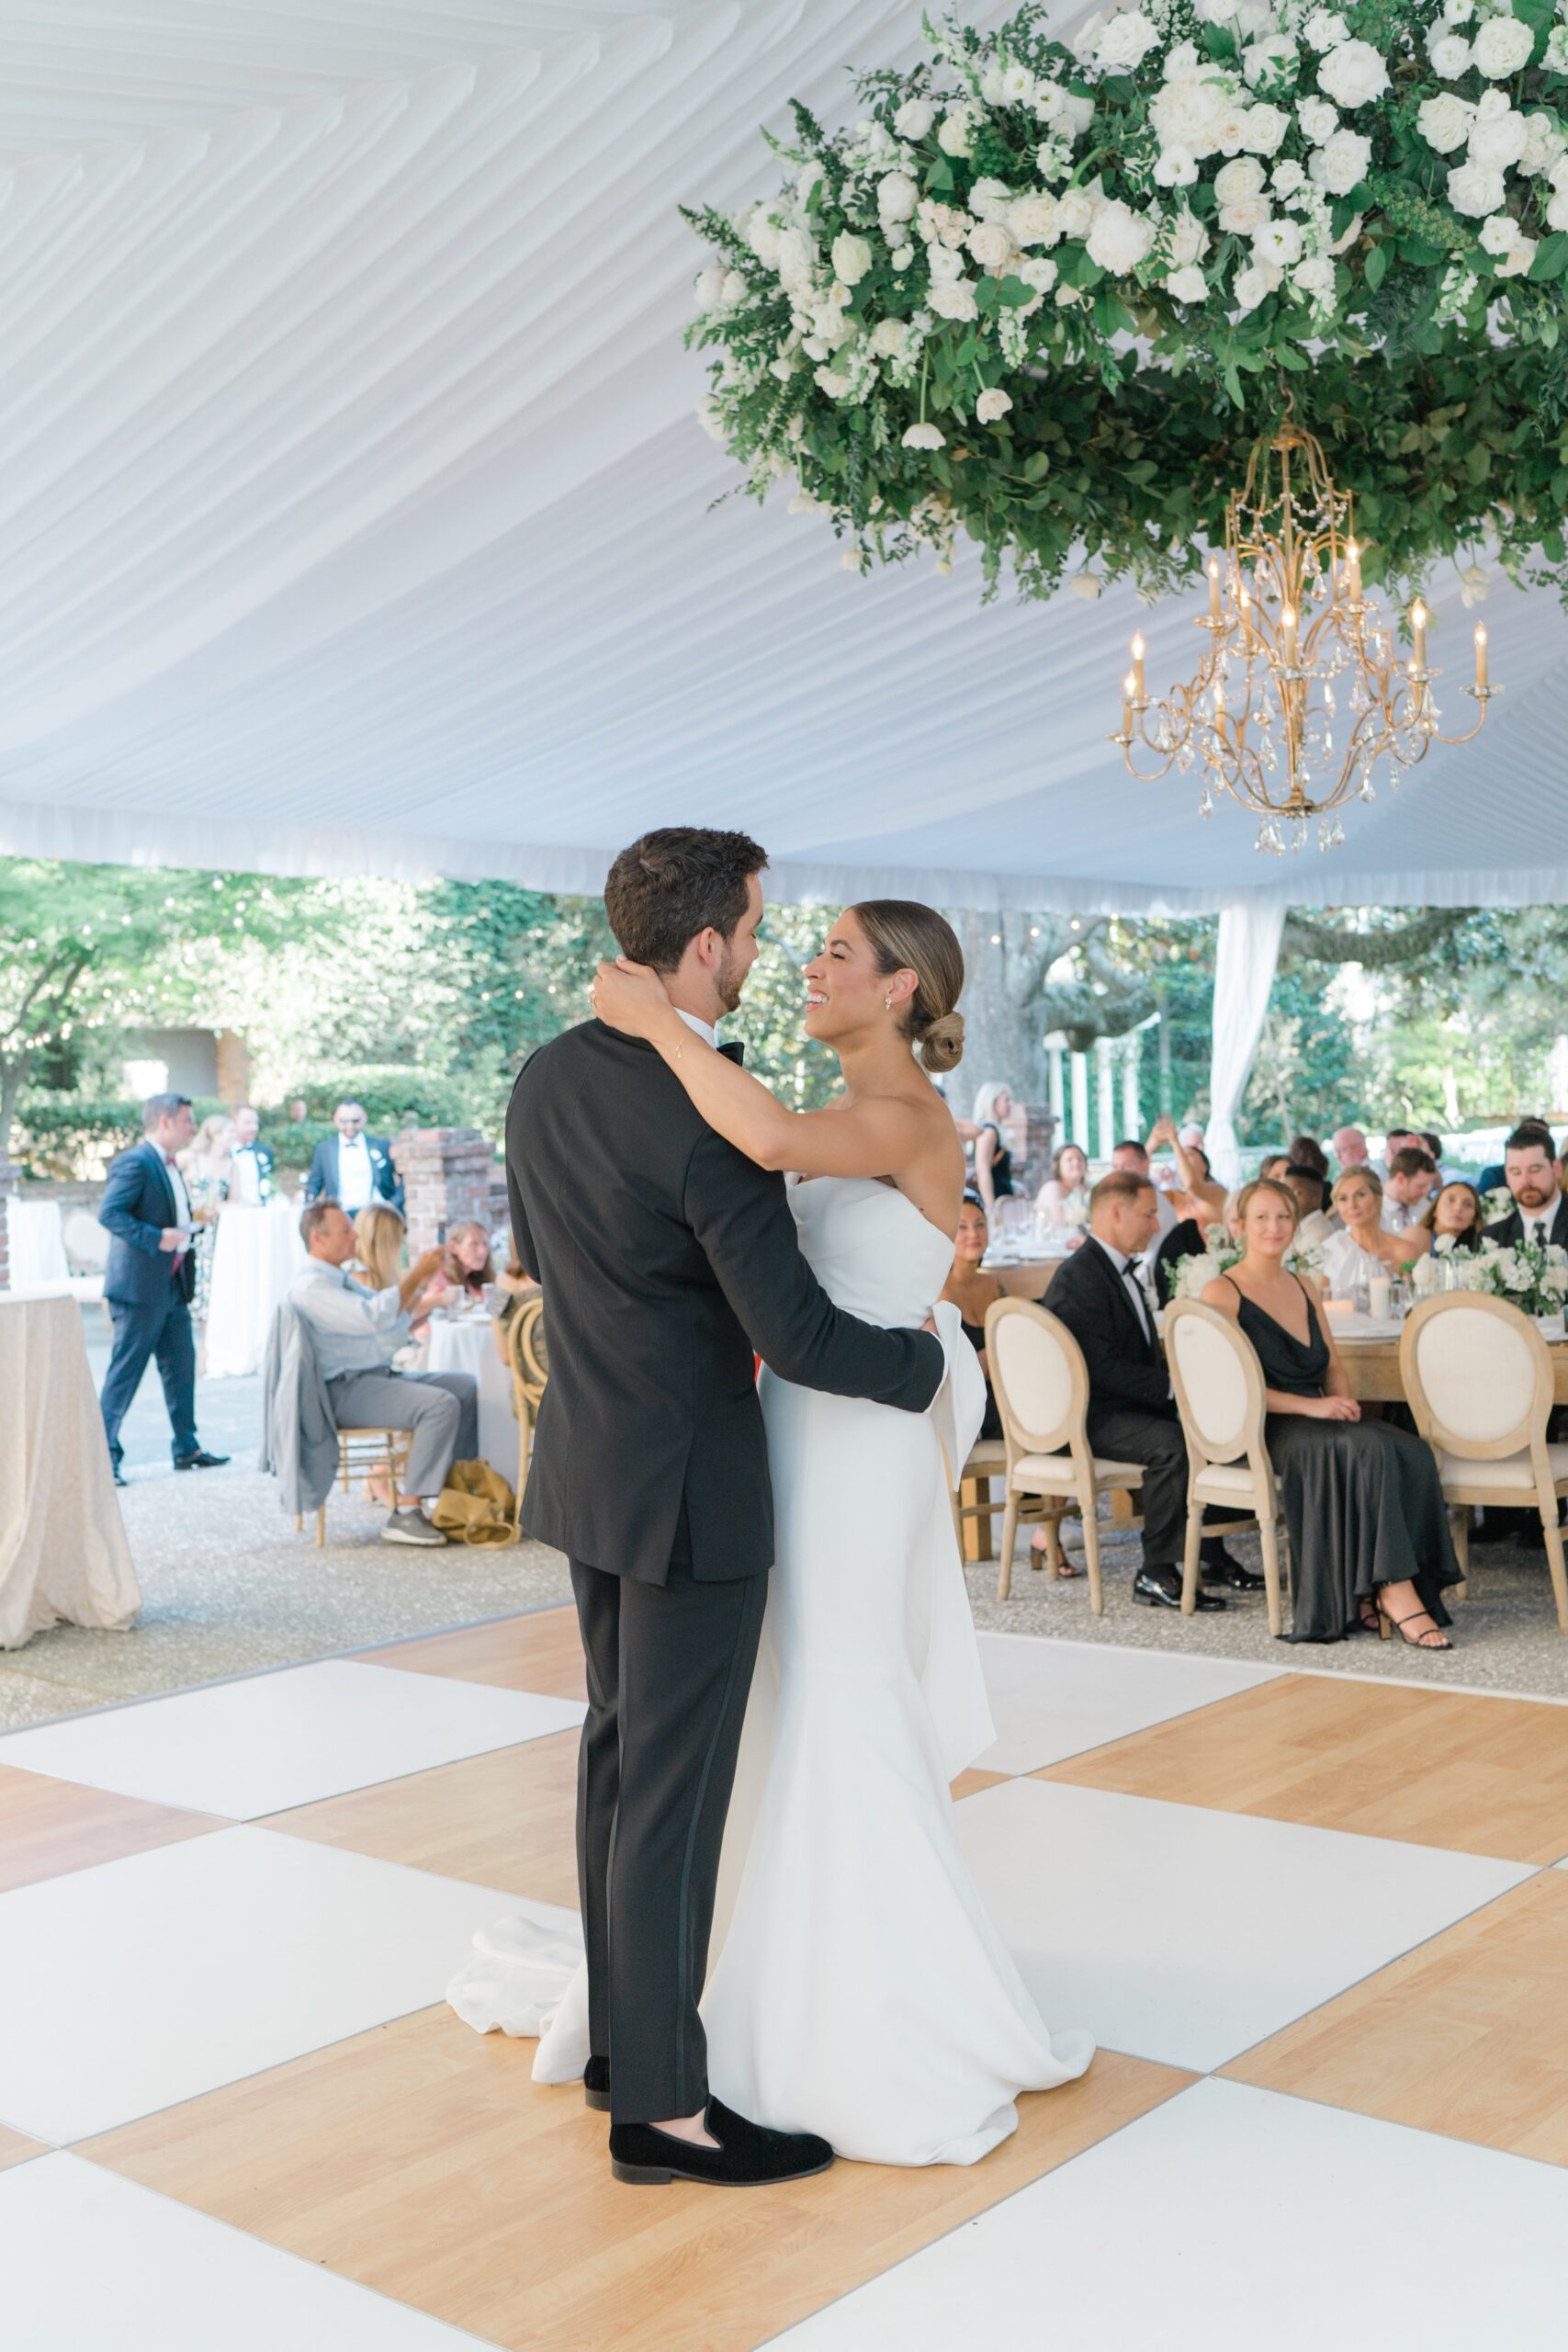 Tented outdoor wedding reception bride and groom first dance.